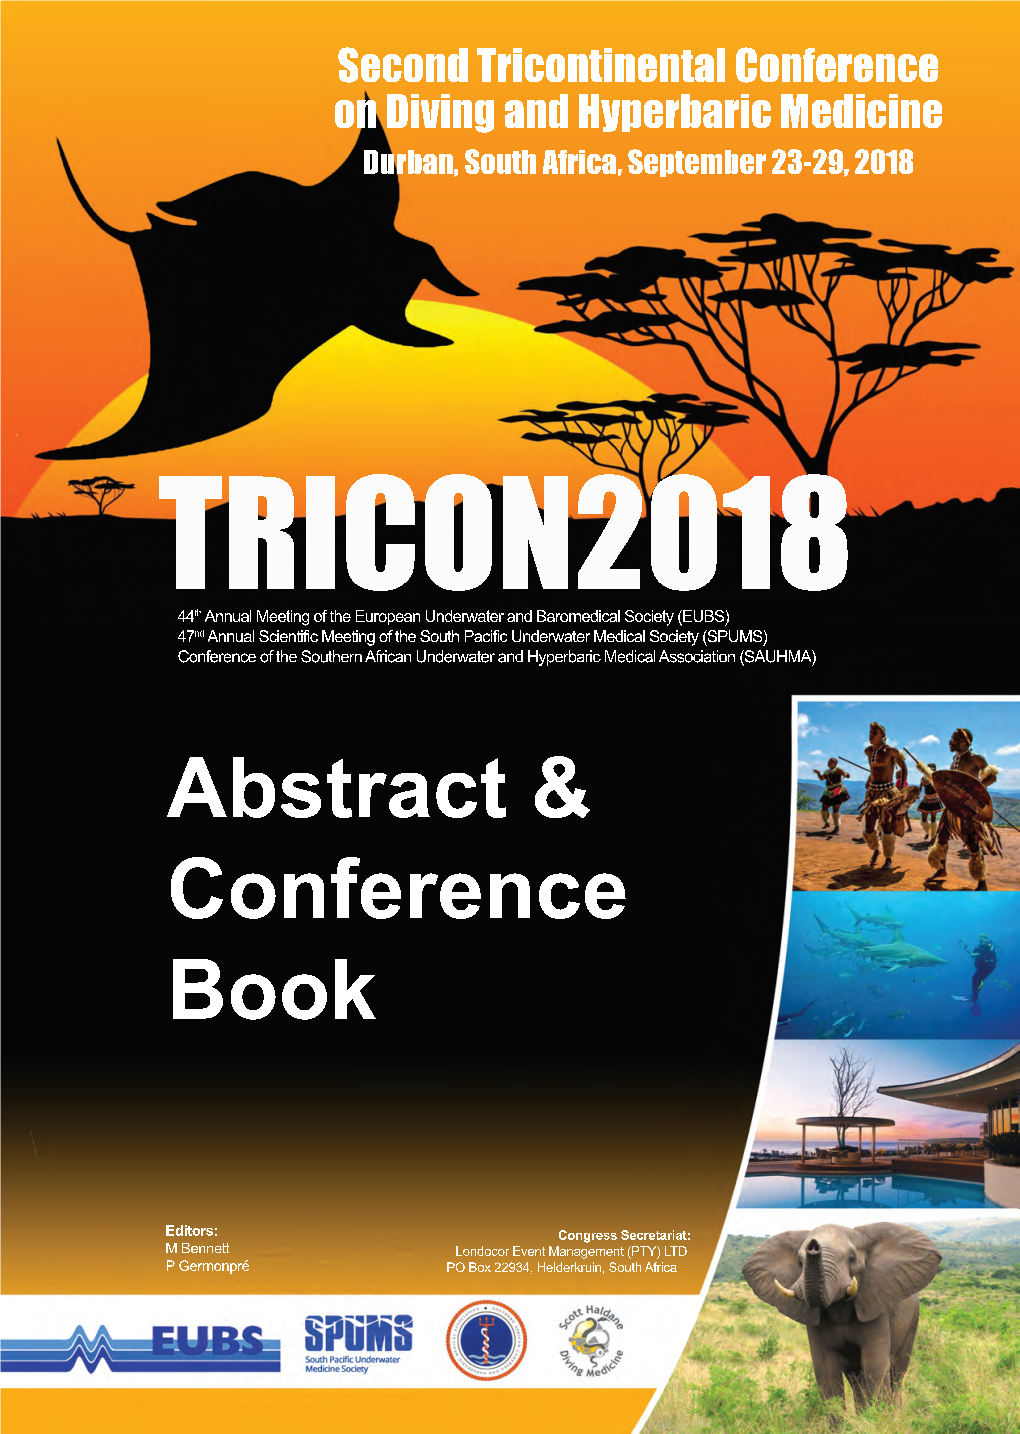 Second Tricontinental Conference on Diving and Hyperbaric Medicine Durban, South Africa, September 23-29, 2018